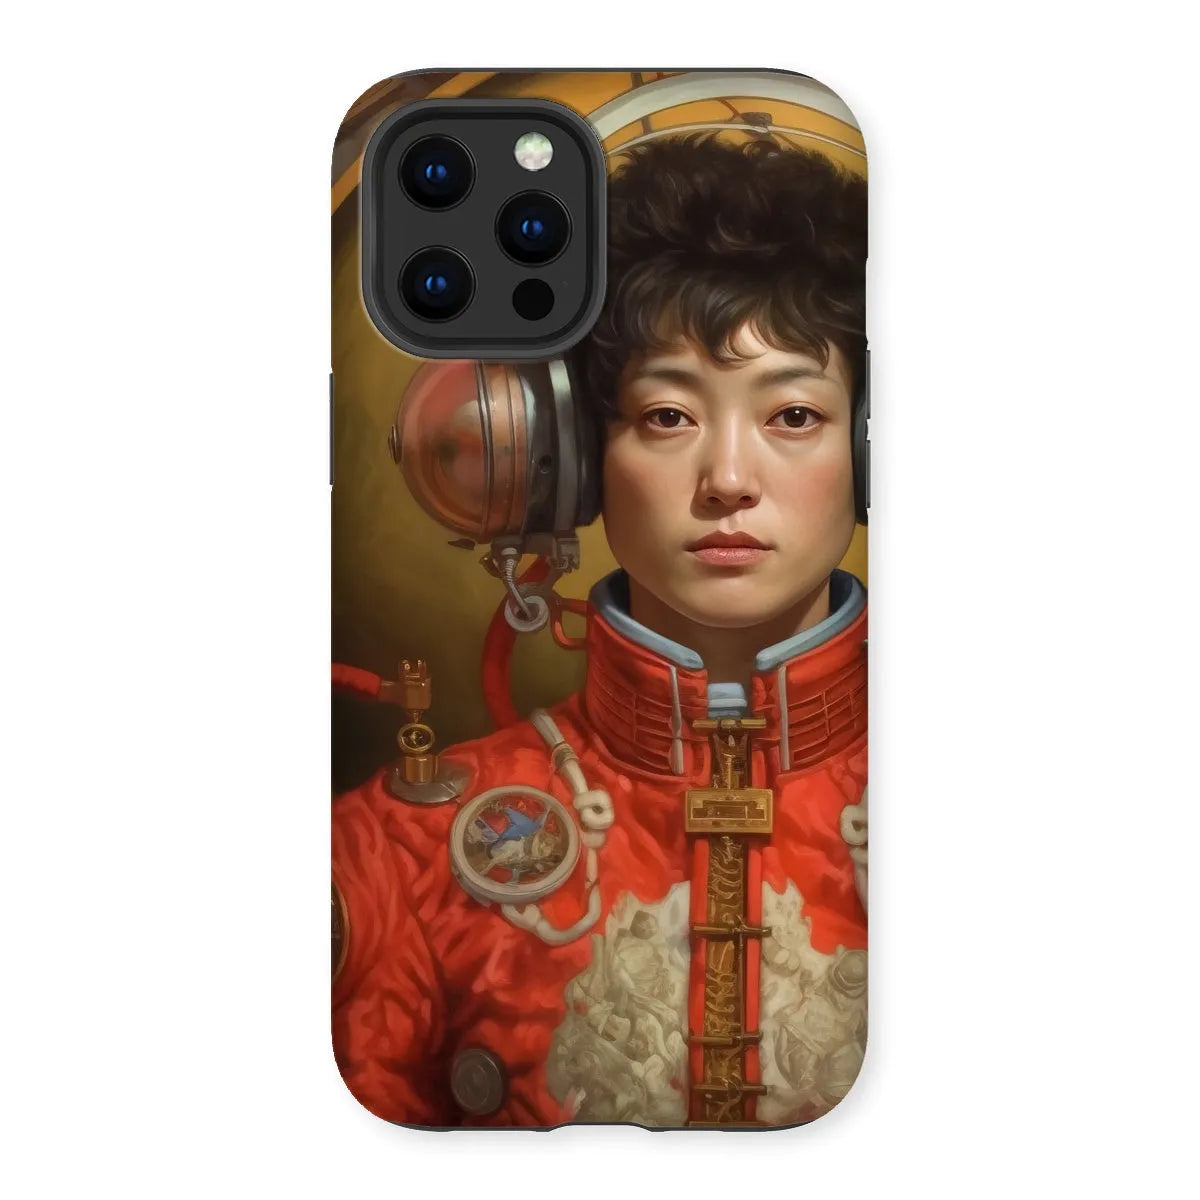 Mùchén - Gay Chinese Astronaut Aesthetic Phone Case - Iphone 13 Pro Max / Matte - Mobile Phone Cases - Aesthetic Art